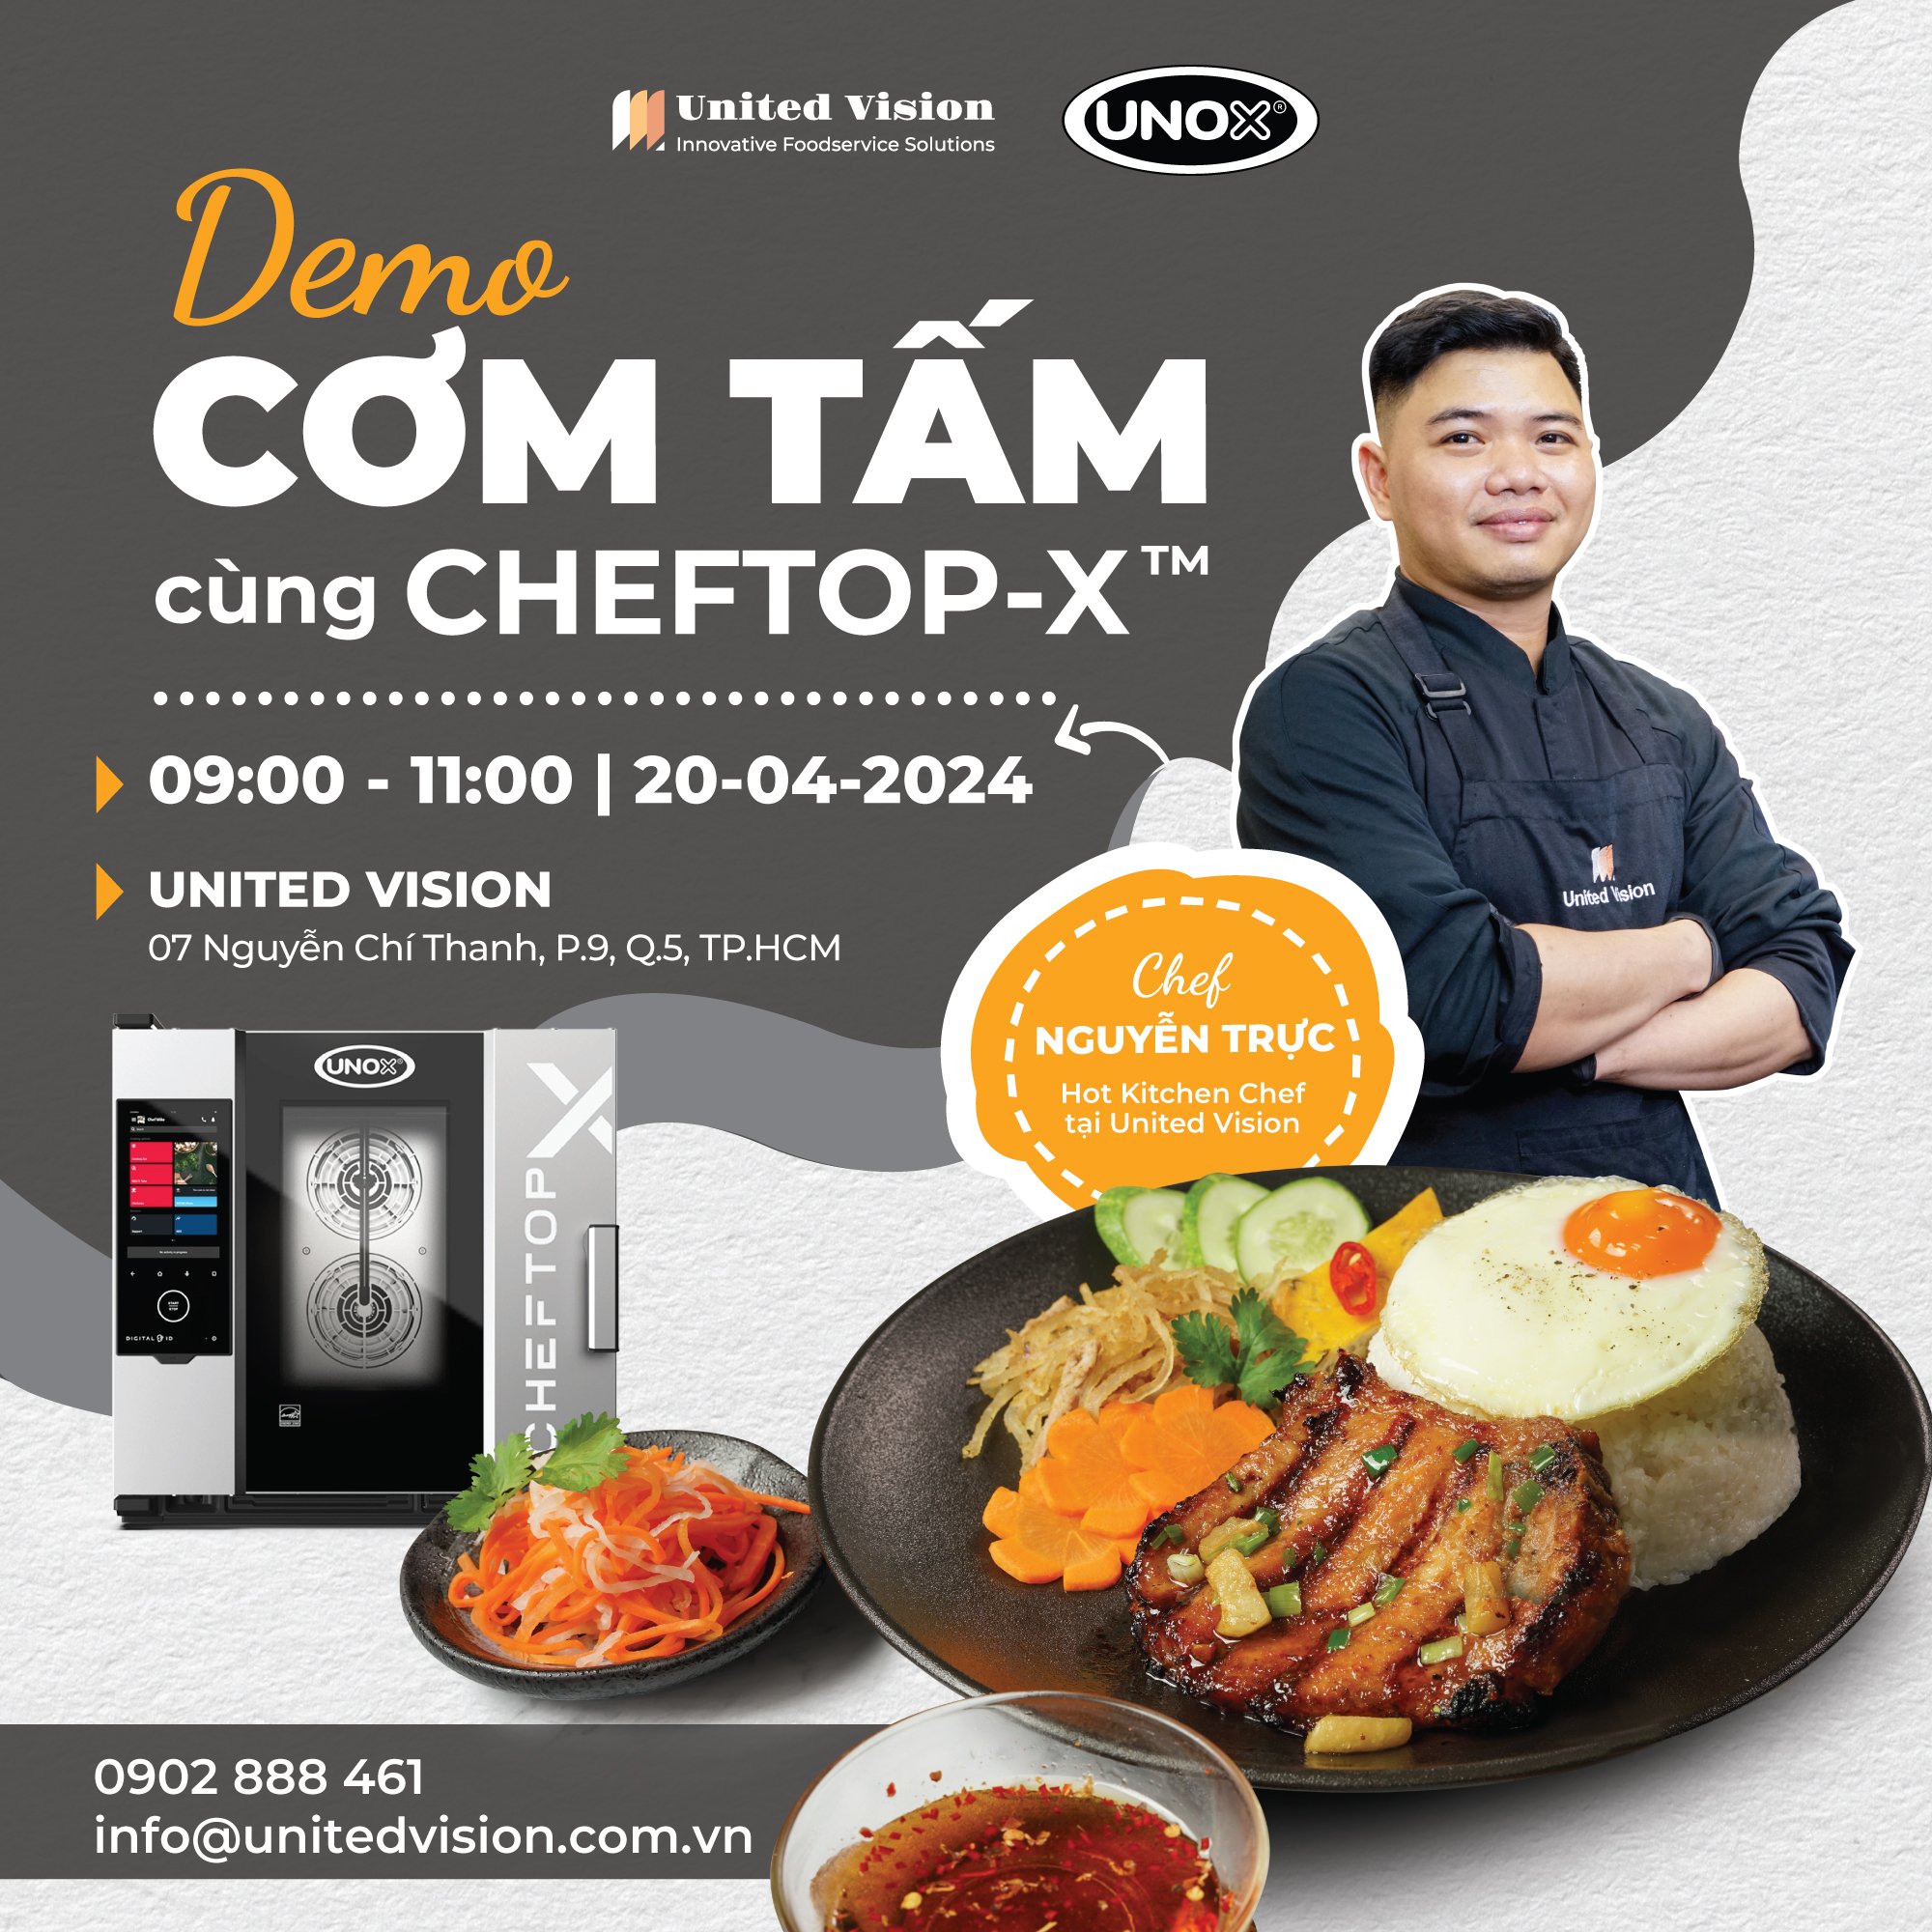 Making Saigon Cơm Tấm With Only 1 Single Device - Cheftop™-X Combi Oven From Unox